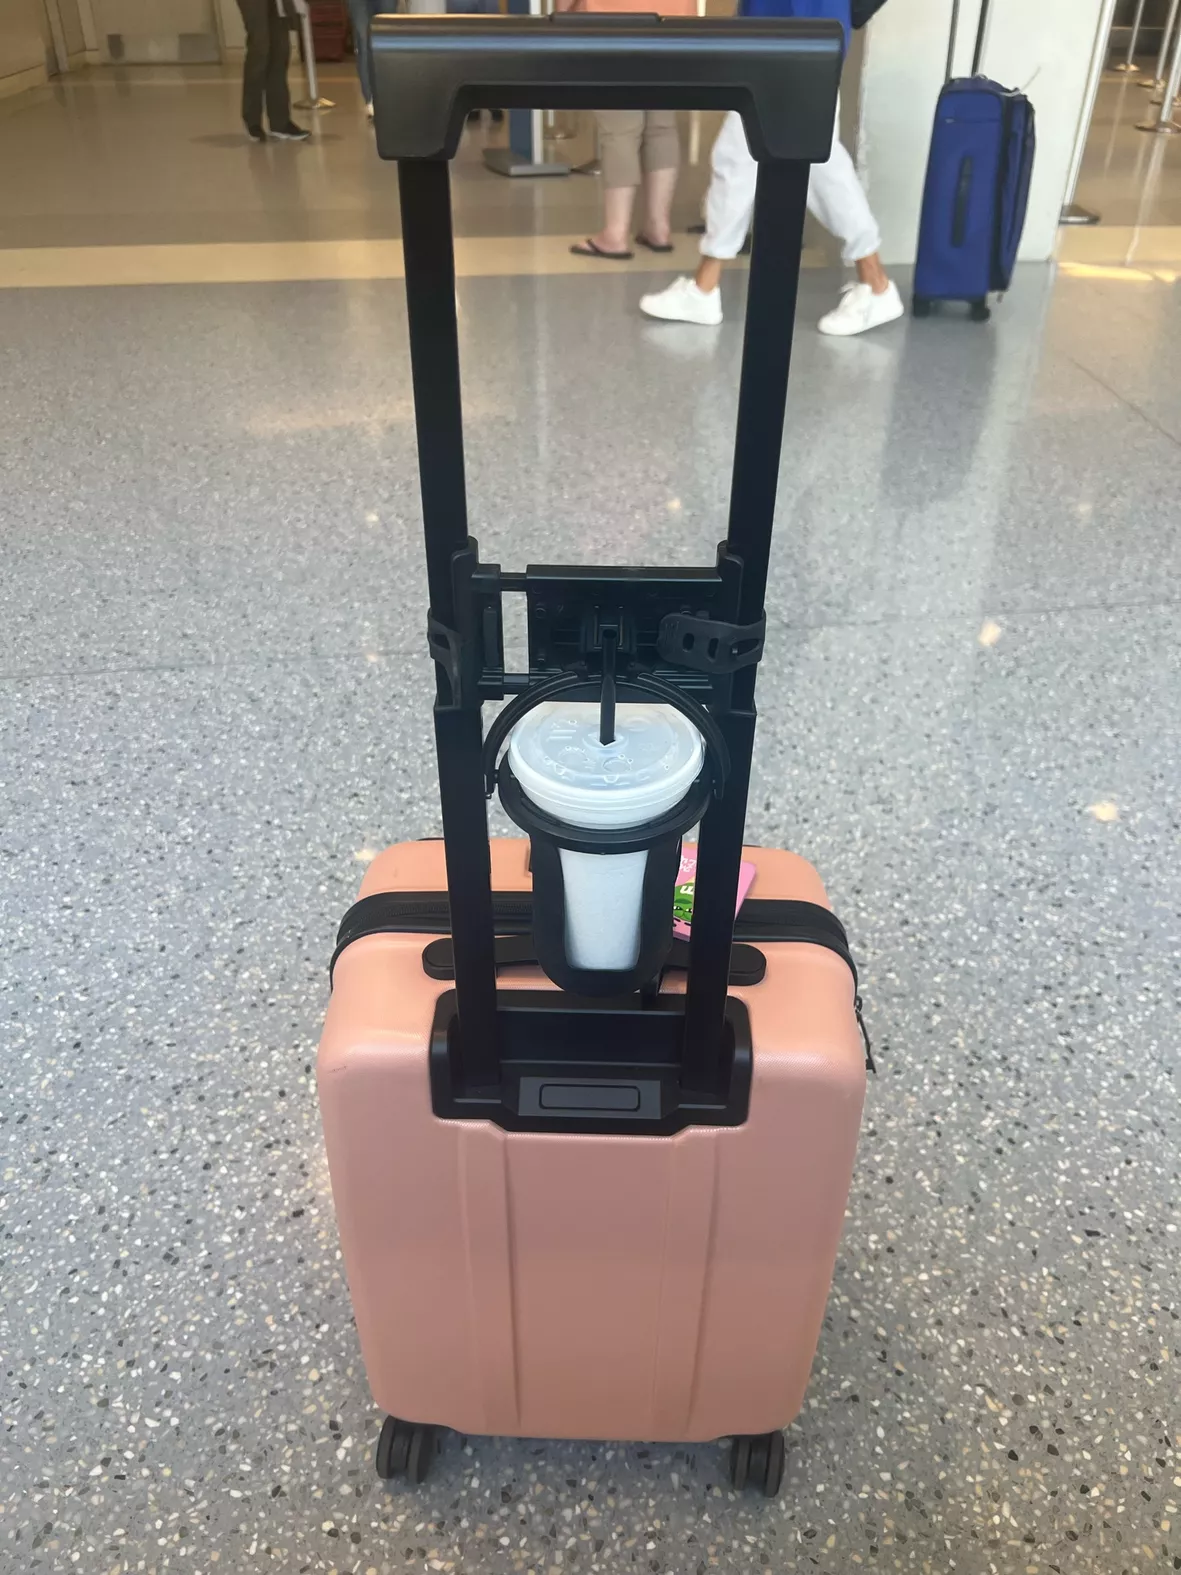 Freehand travel cup holder works on suitcases